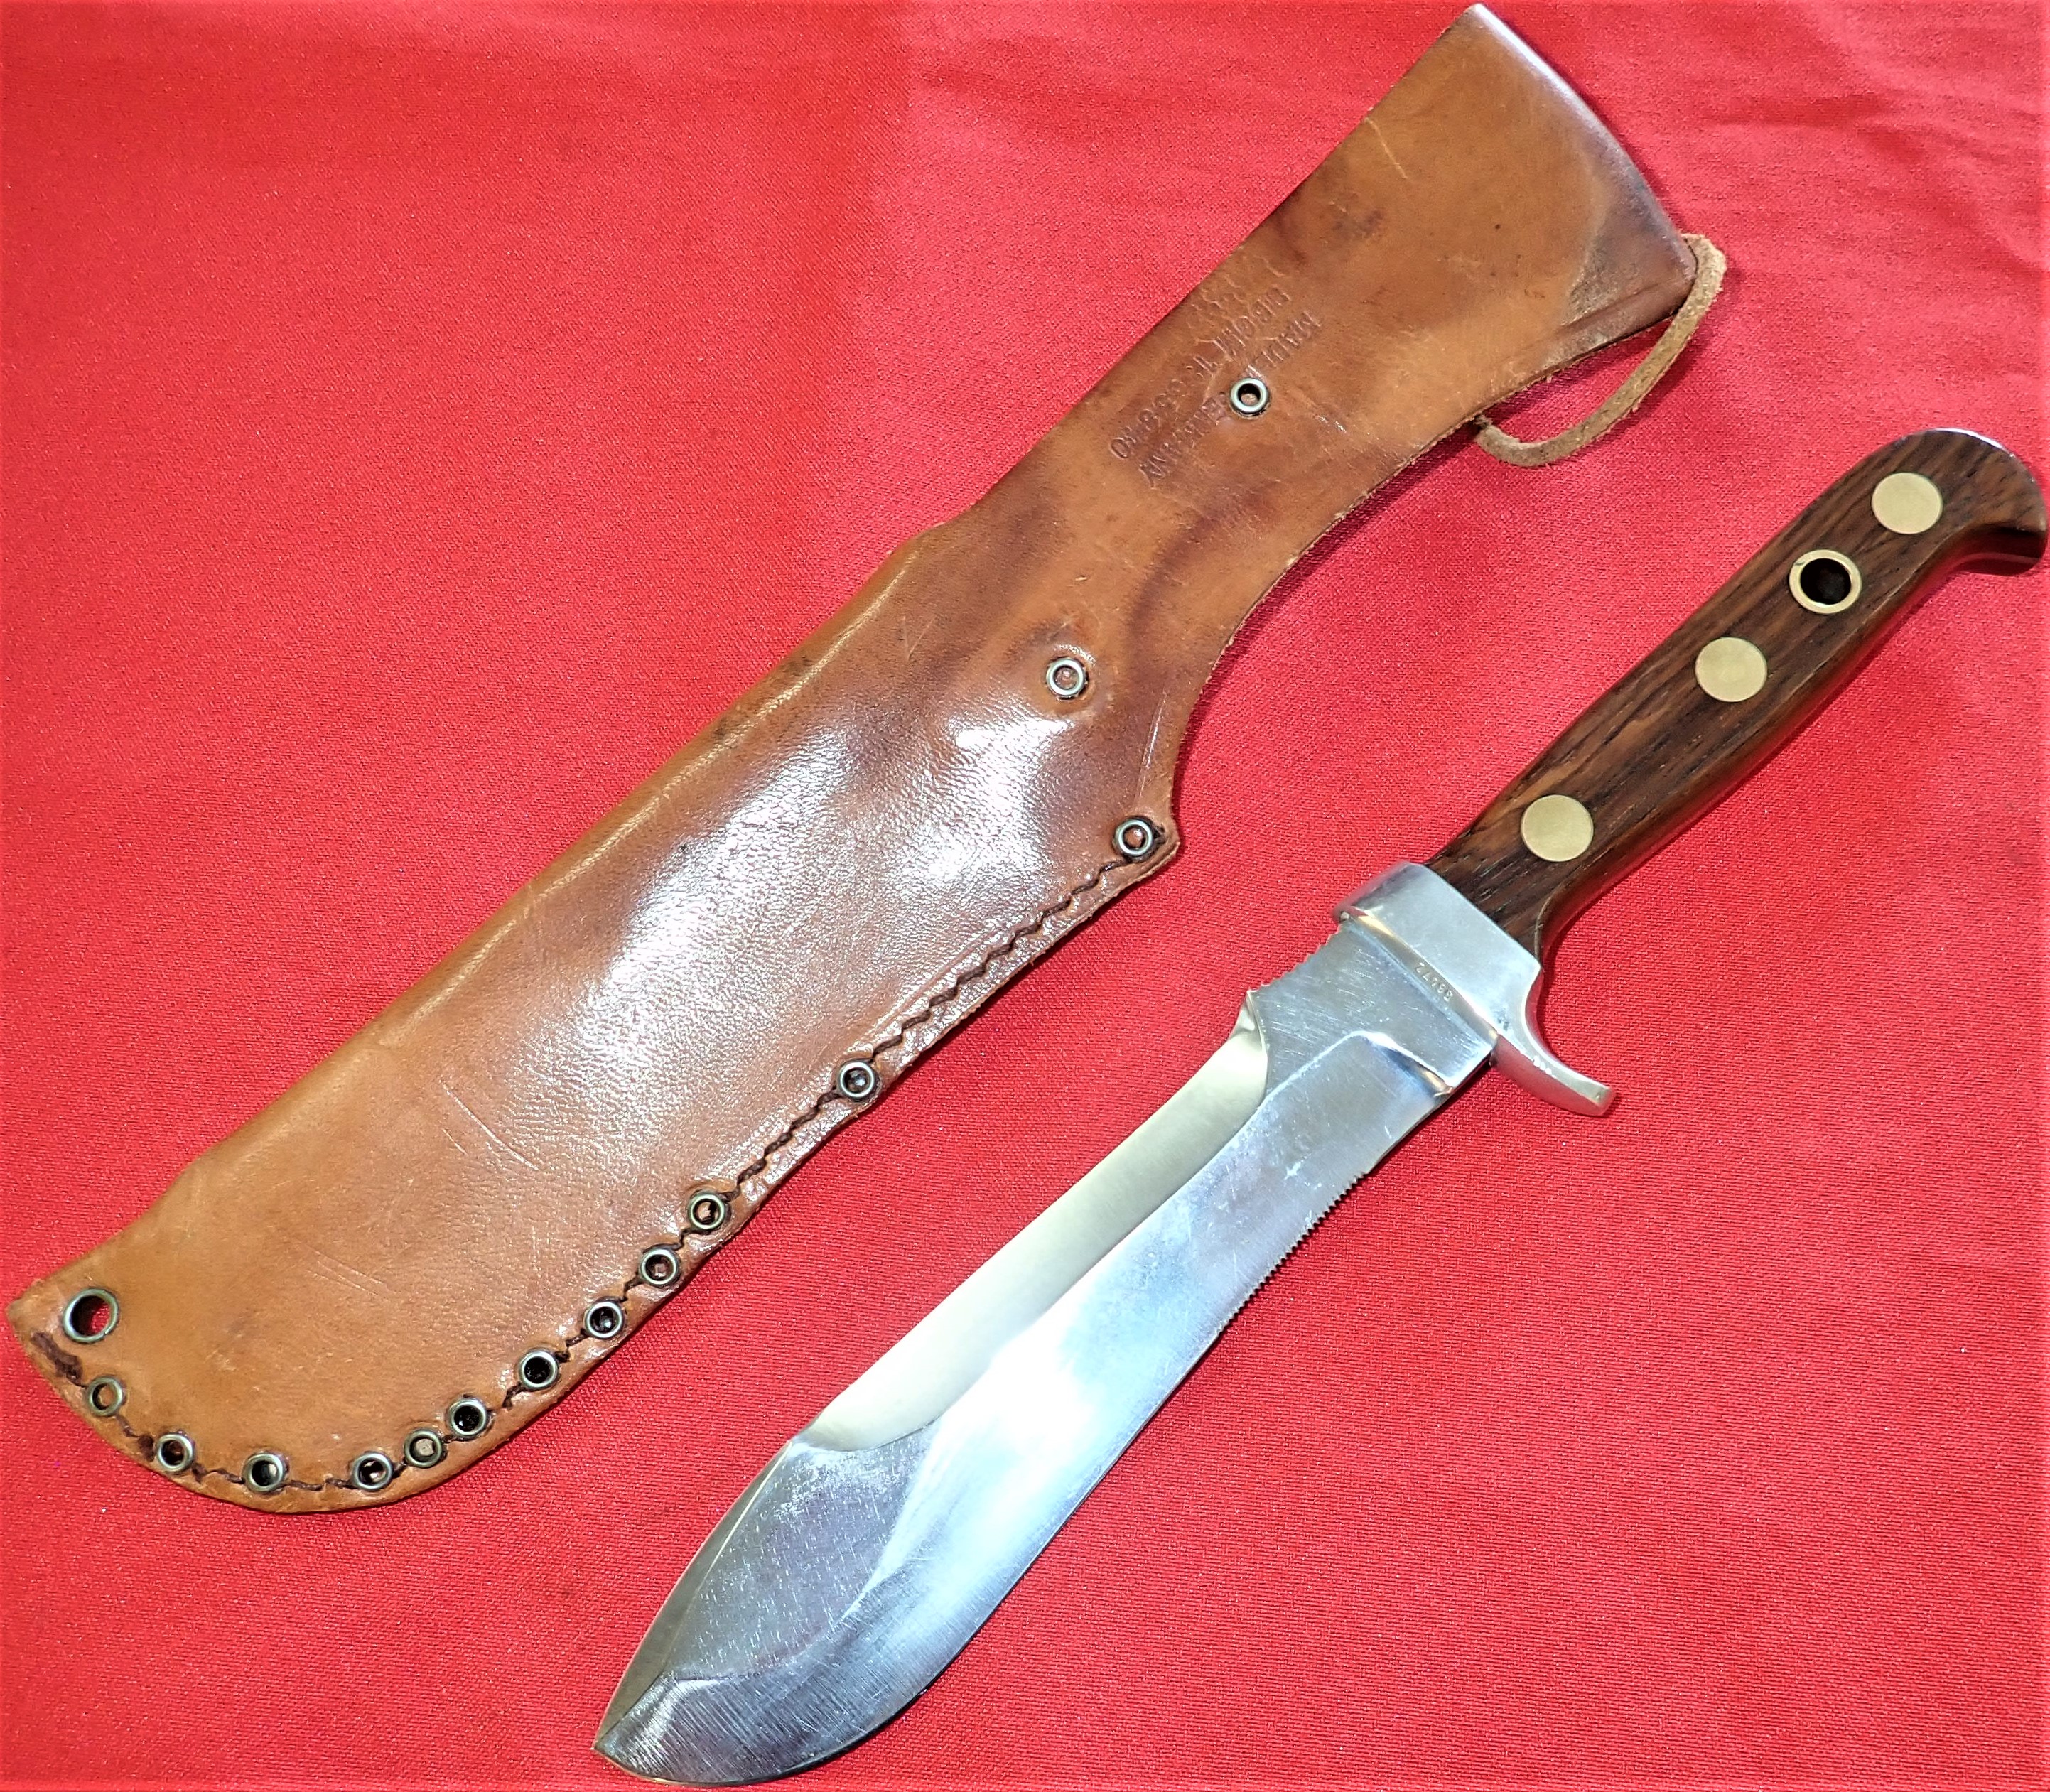 German made knife & scabbard by Puma 1 - Image 2 of 3